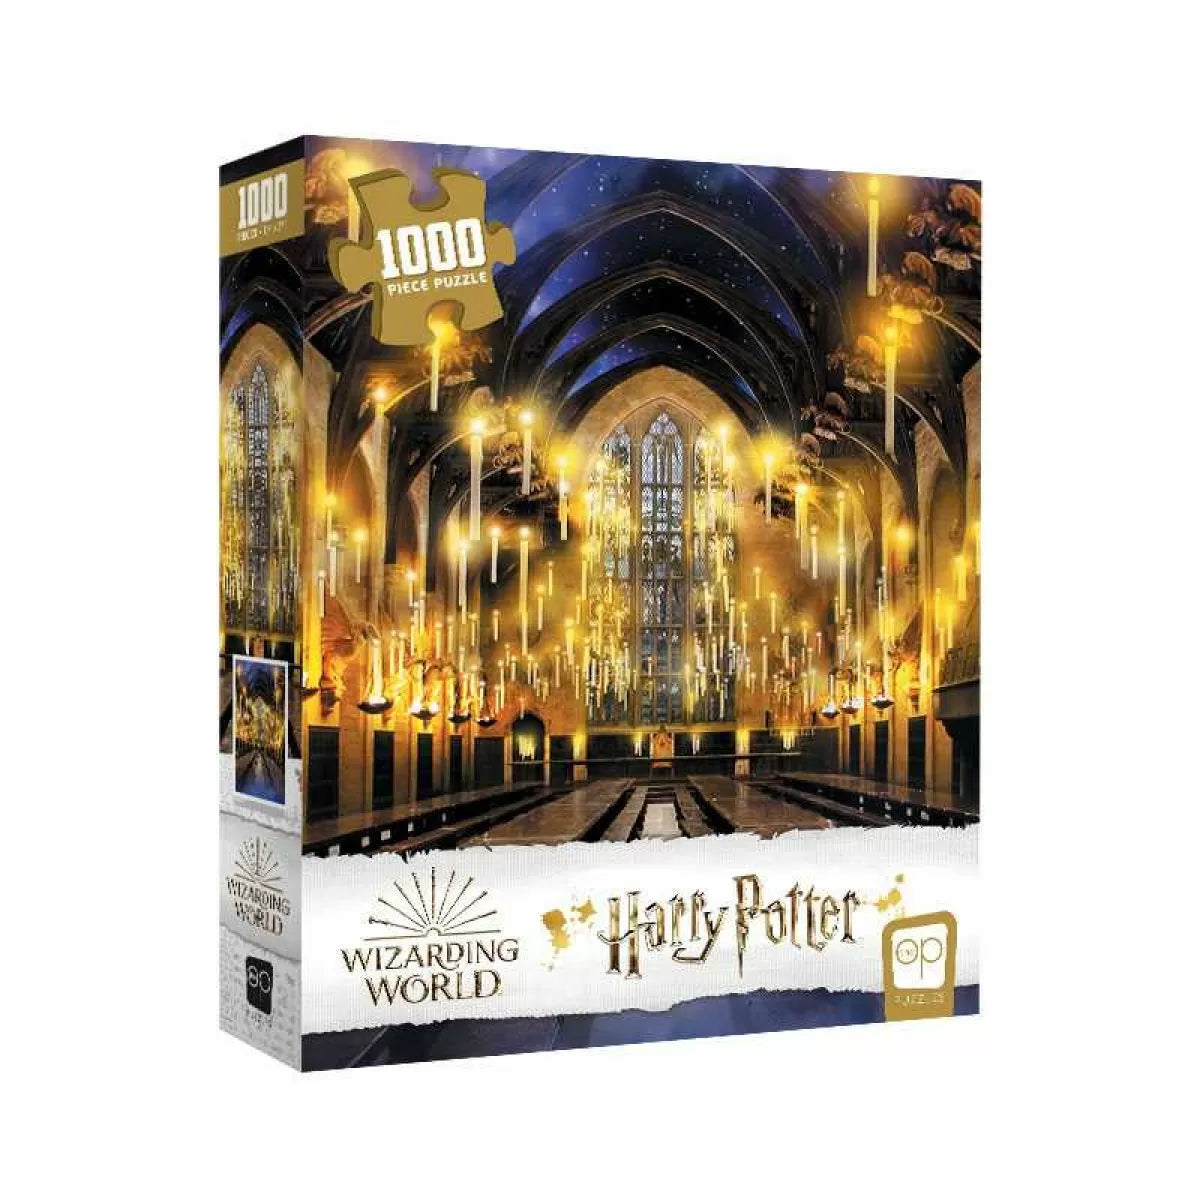 The Op Harry Potter Great Hall 1000 Piece Jigsaw